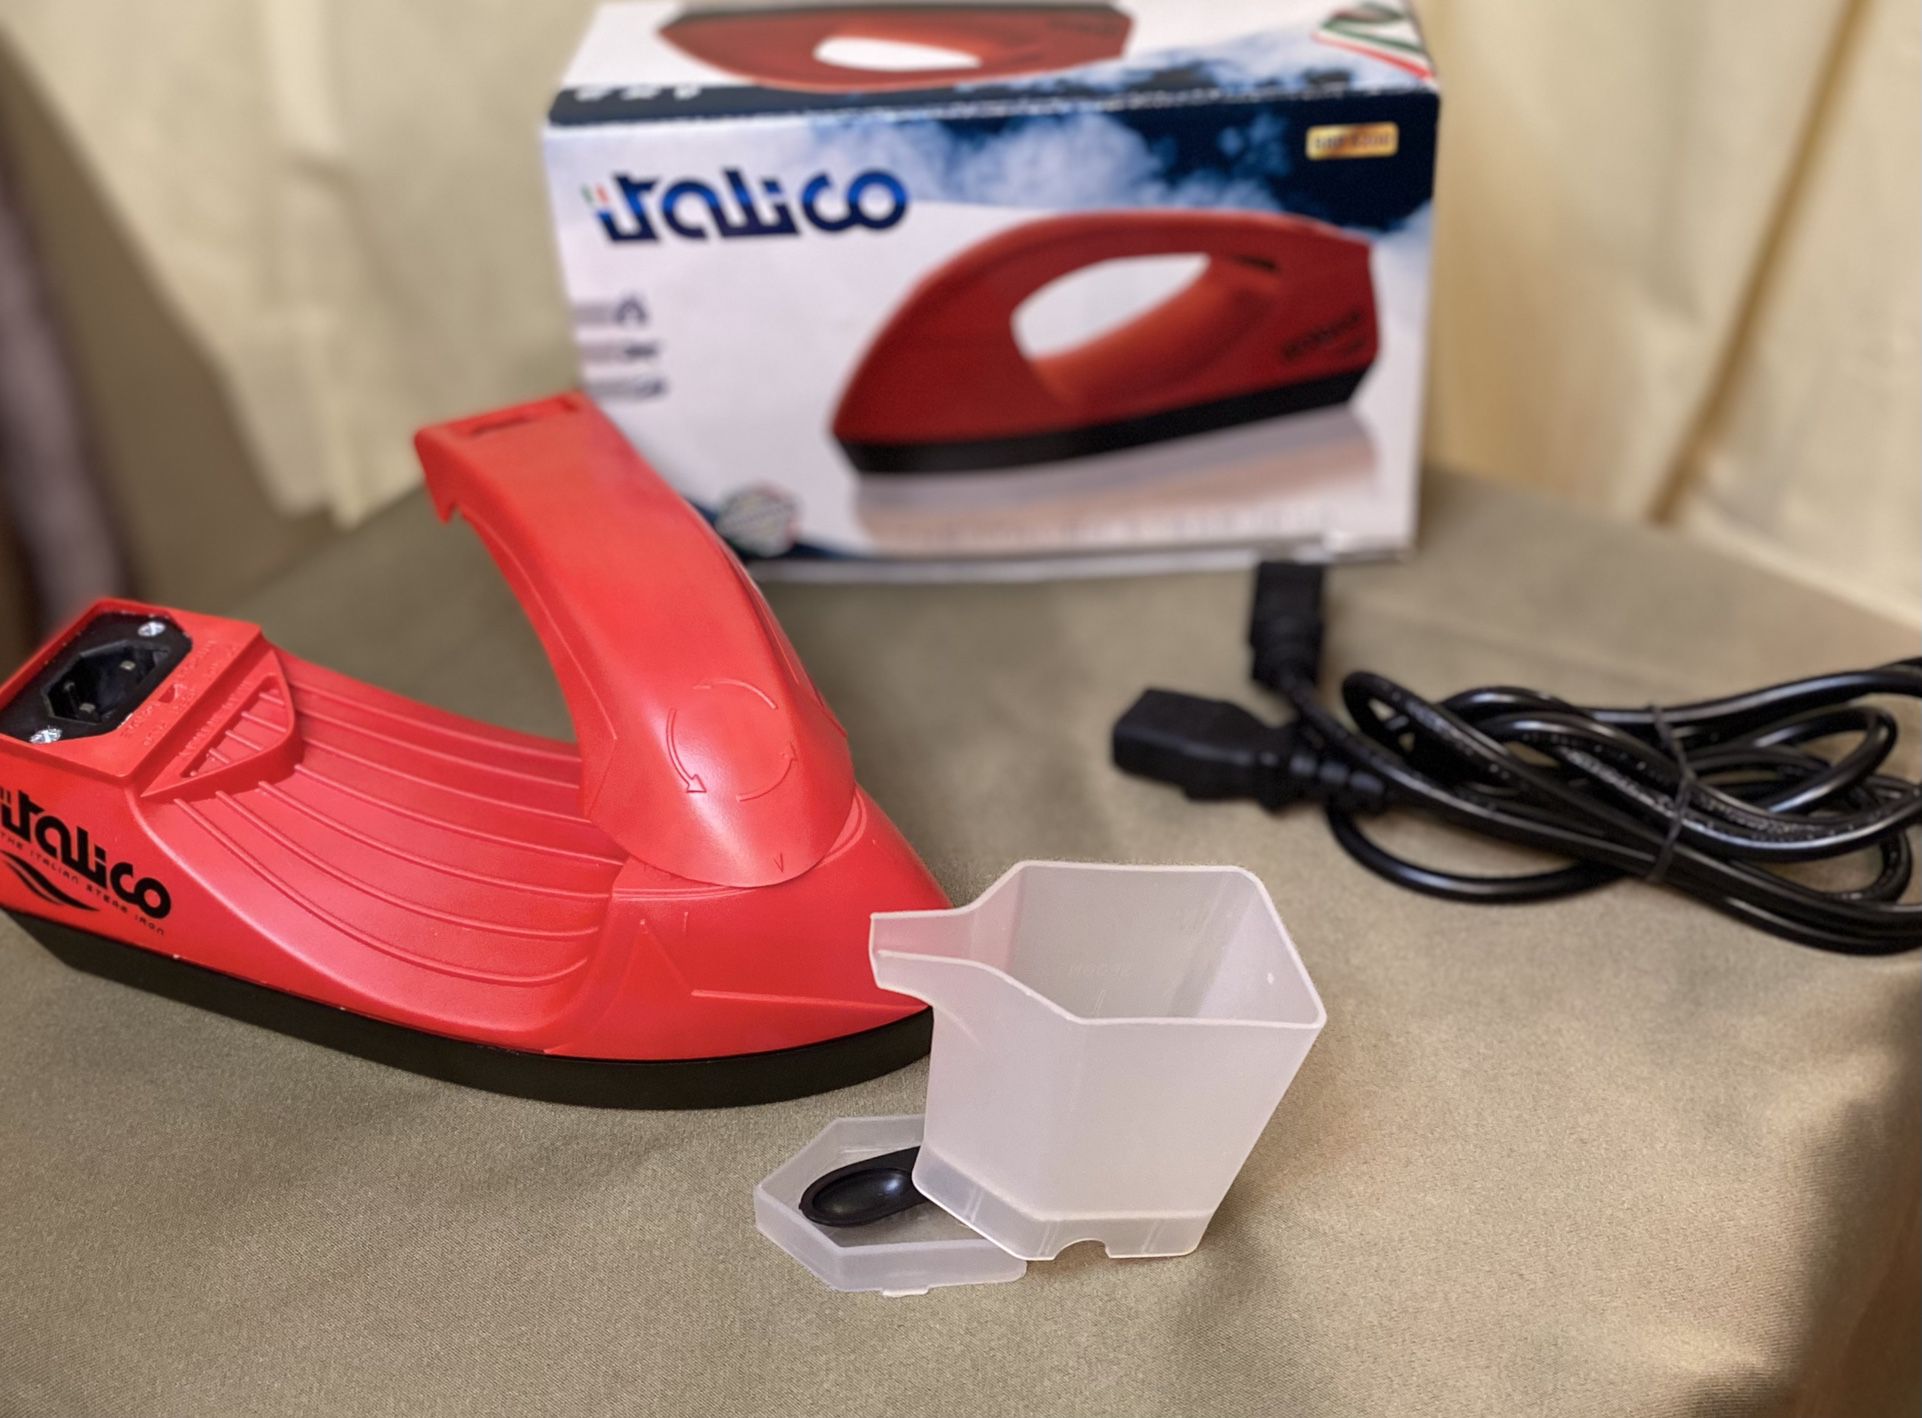 Italico Steam Iron Light Weight Small Portable /Made in Italy